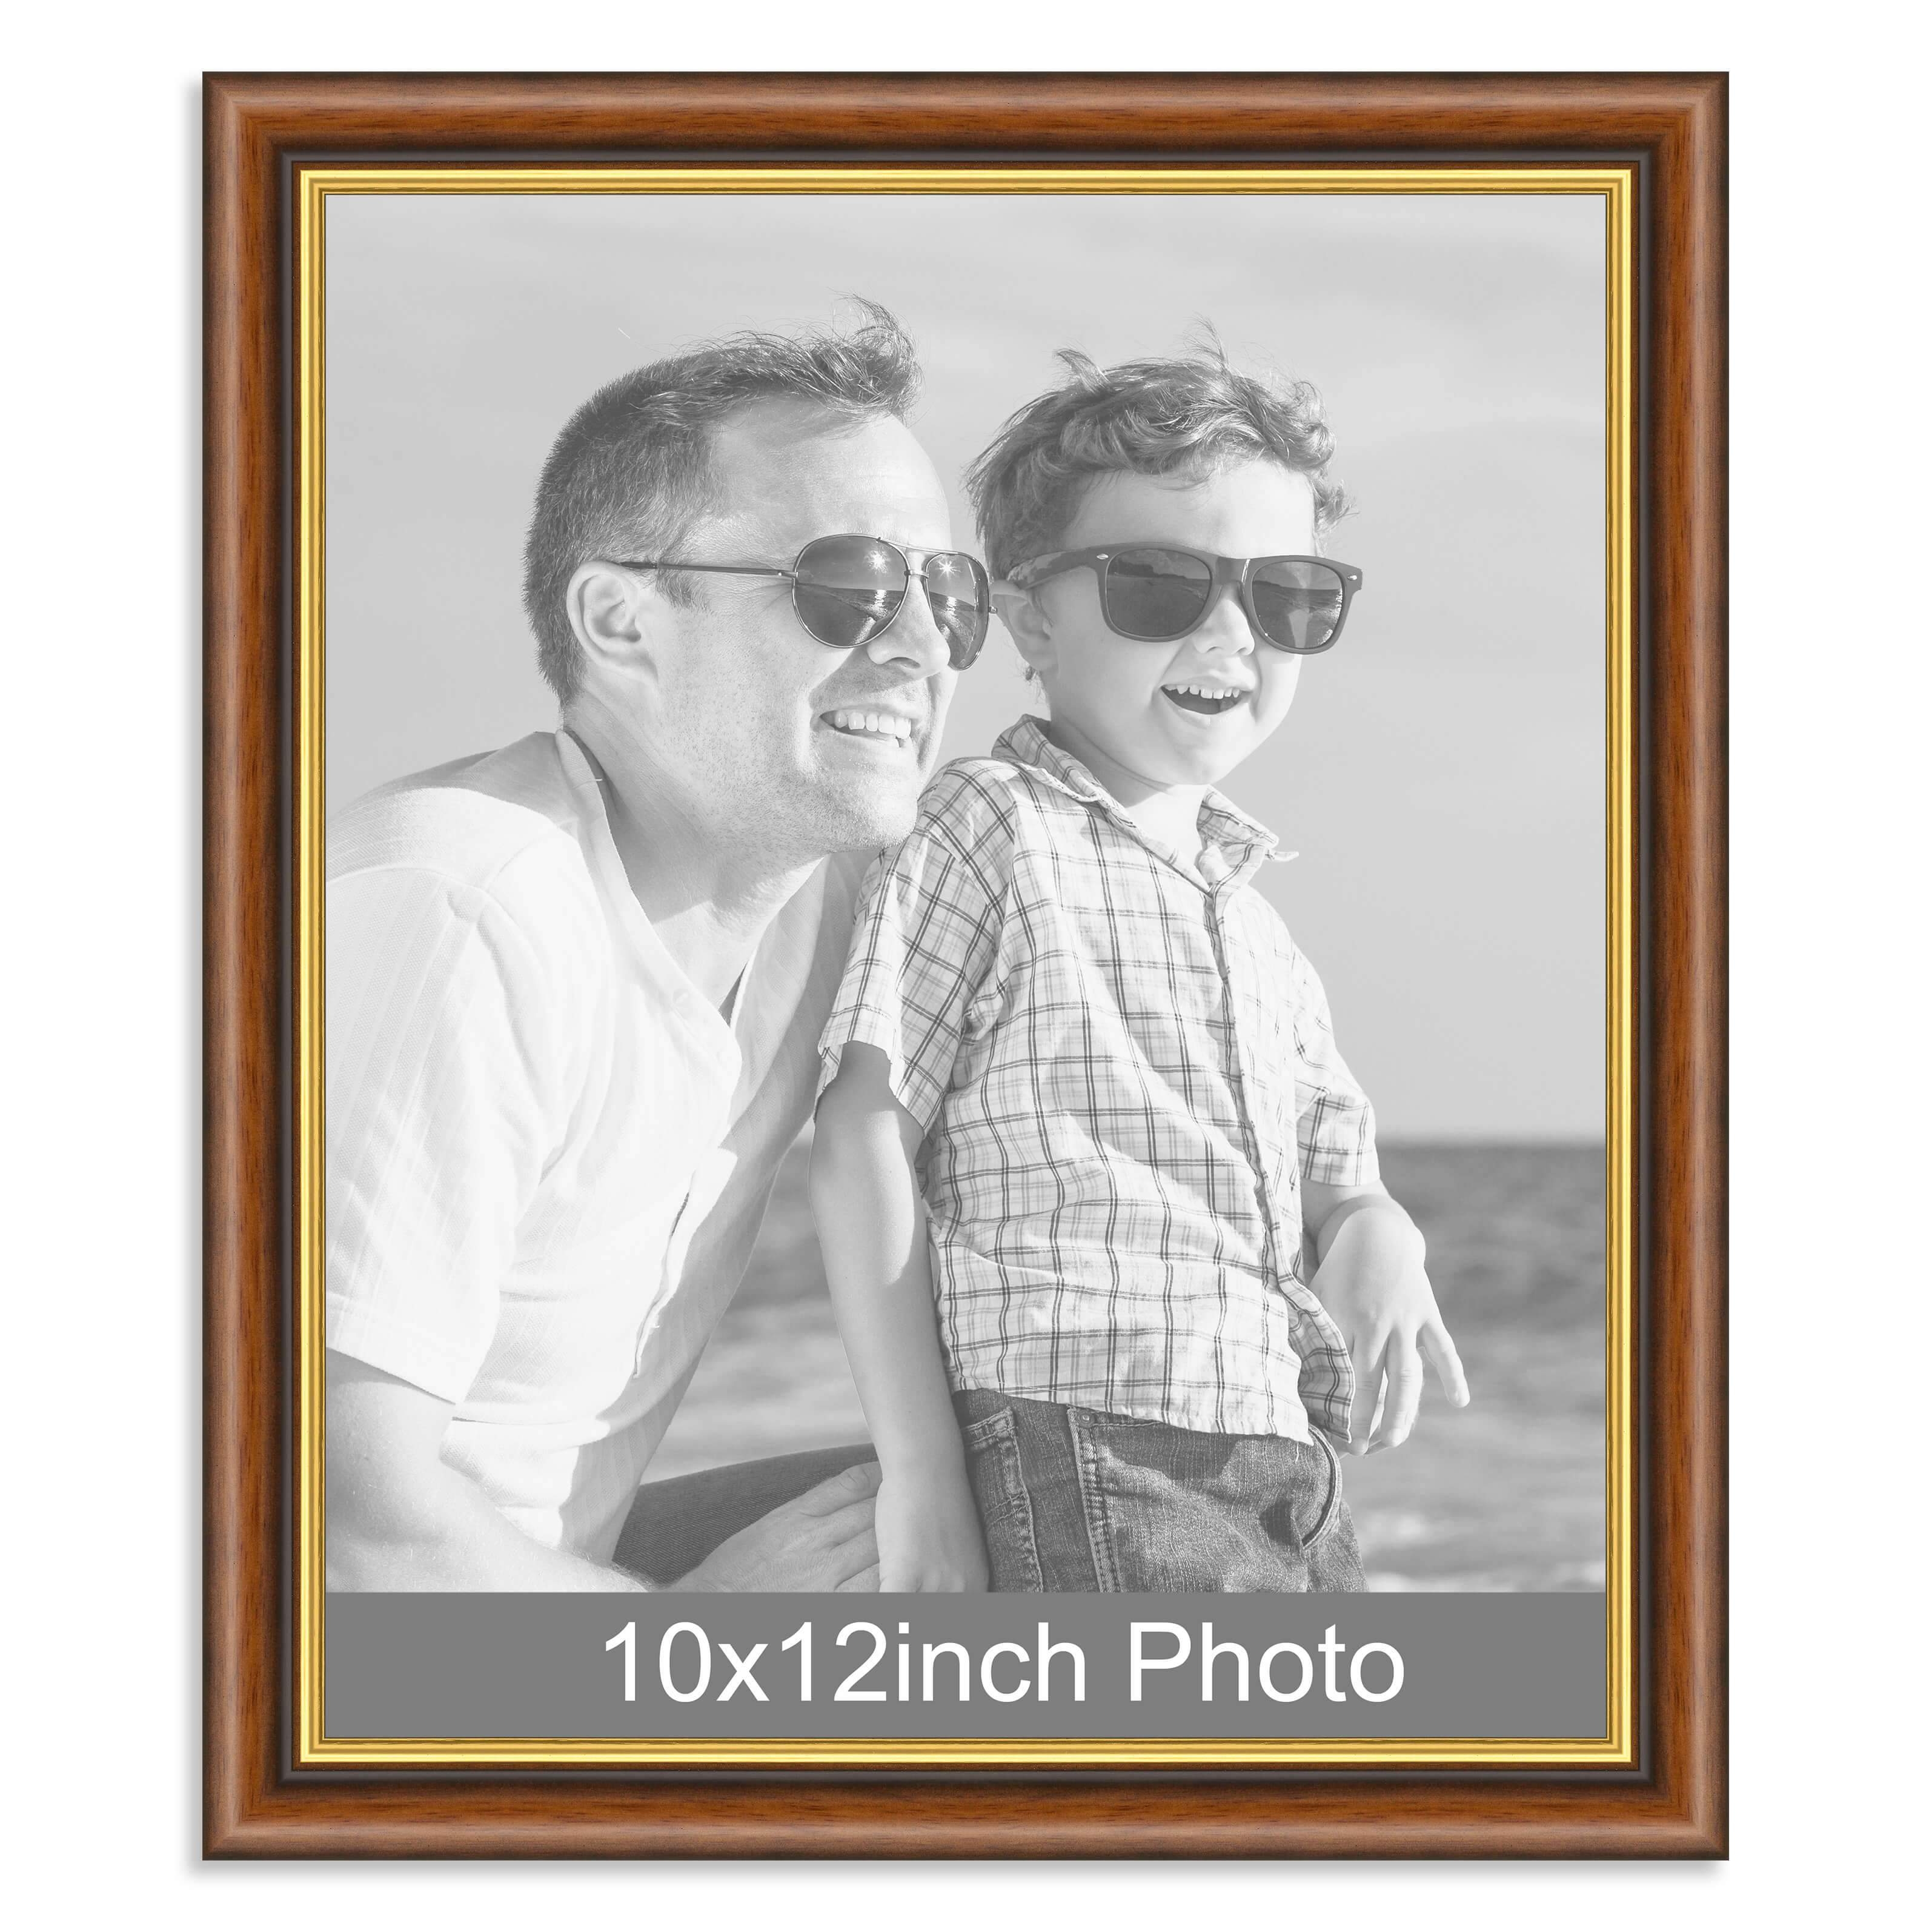 10 x 12inch Mahogany and Gold Wooden Photo Frame for a 10×12/12x10in photo